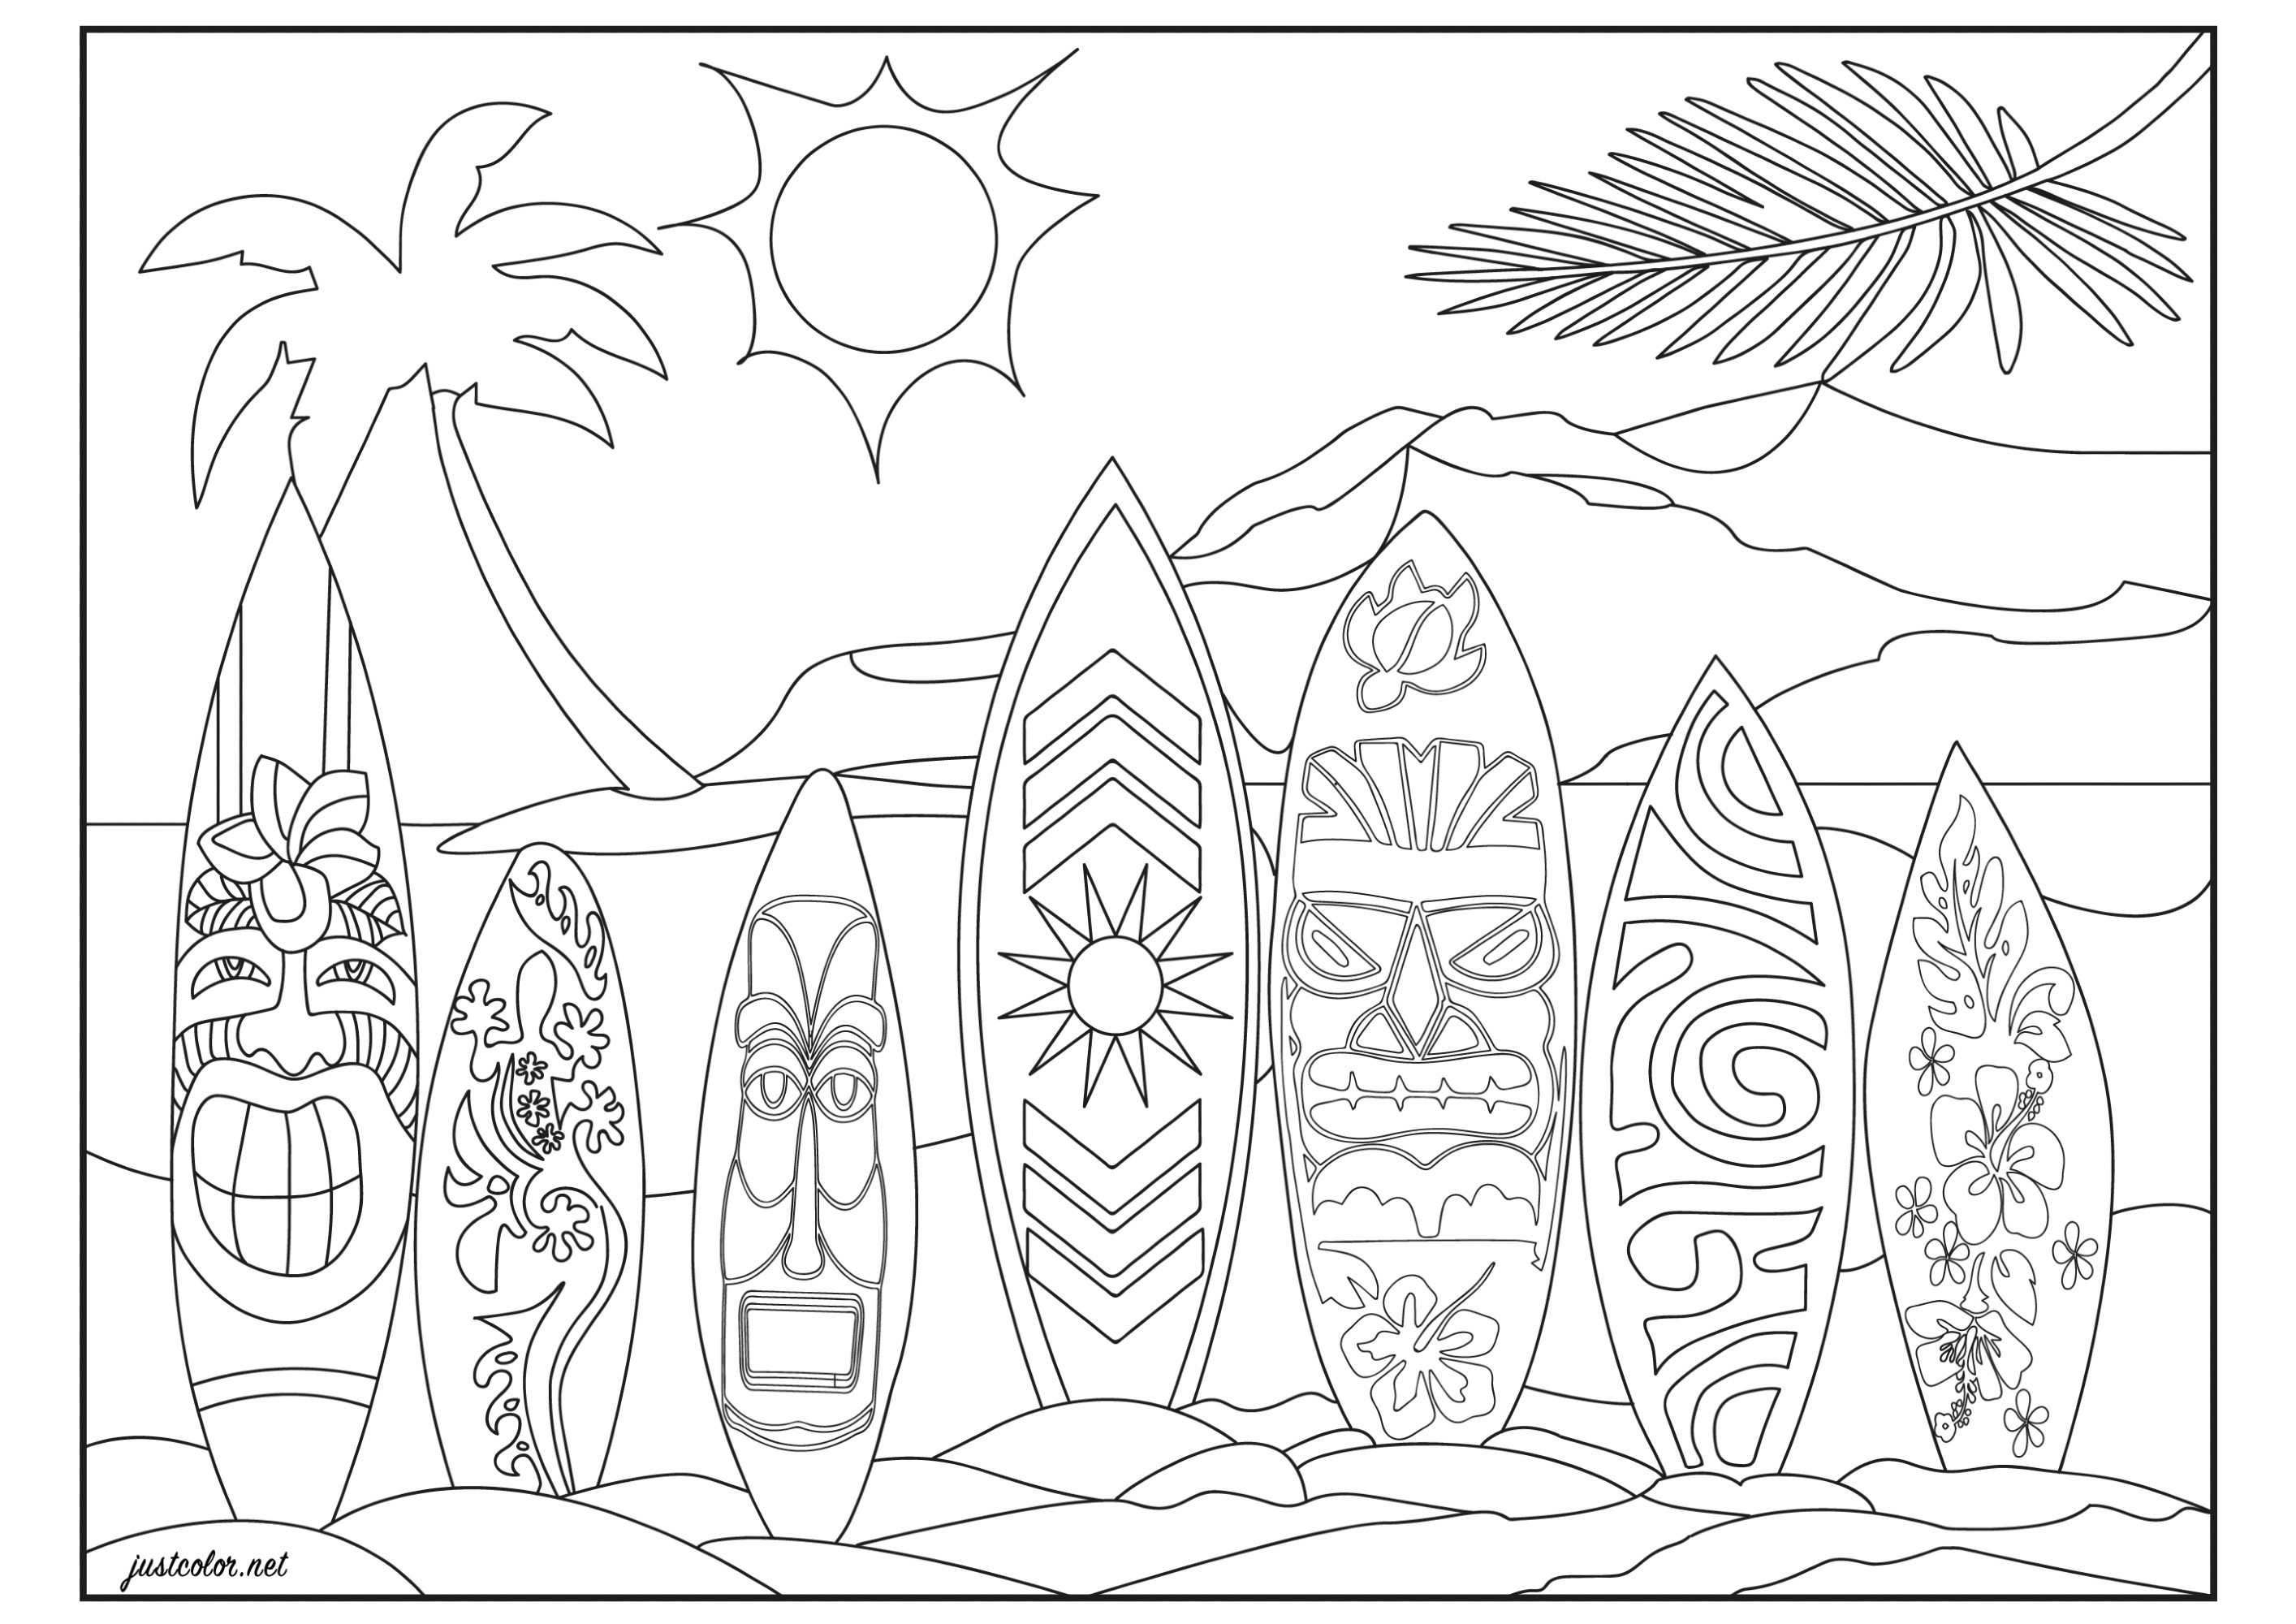 tribal flower coloring pages